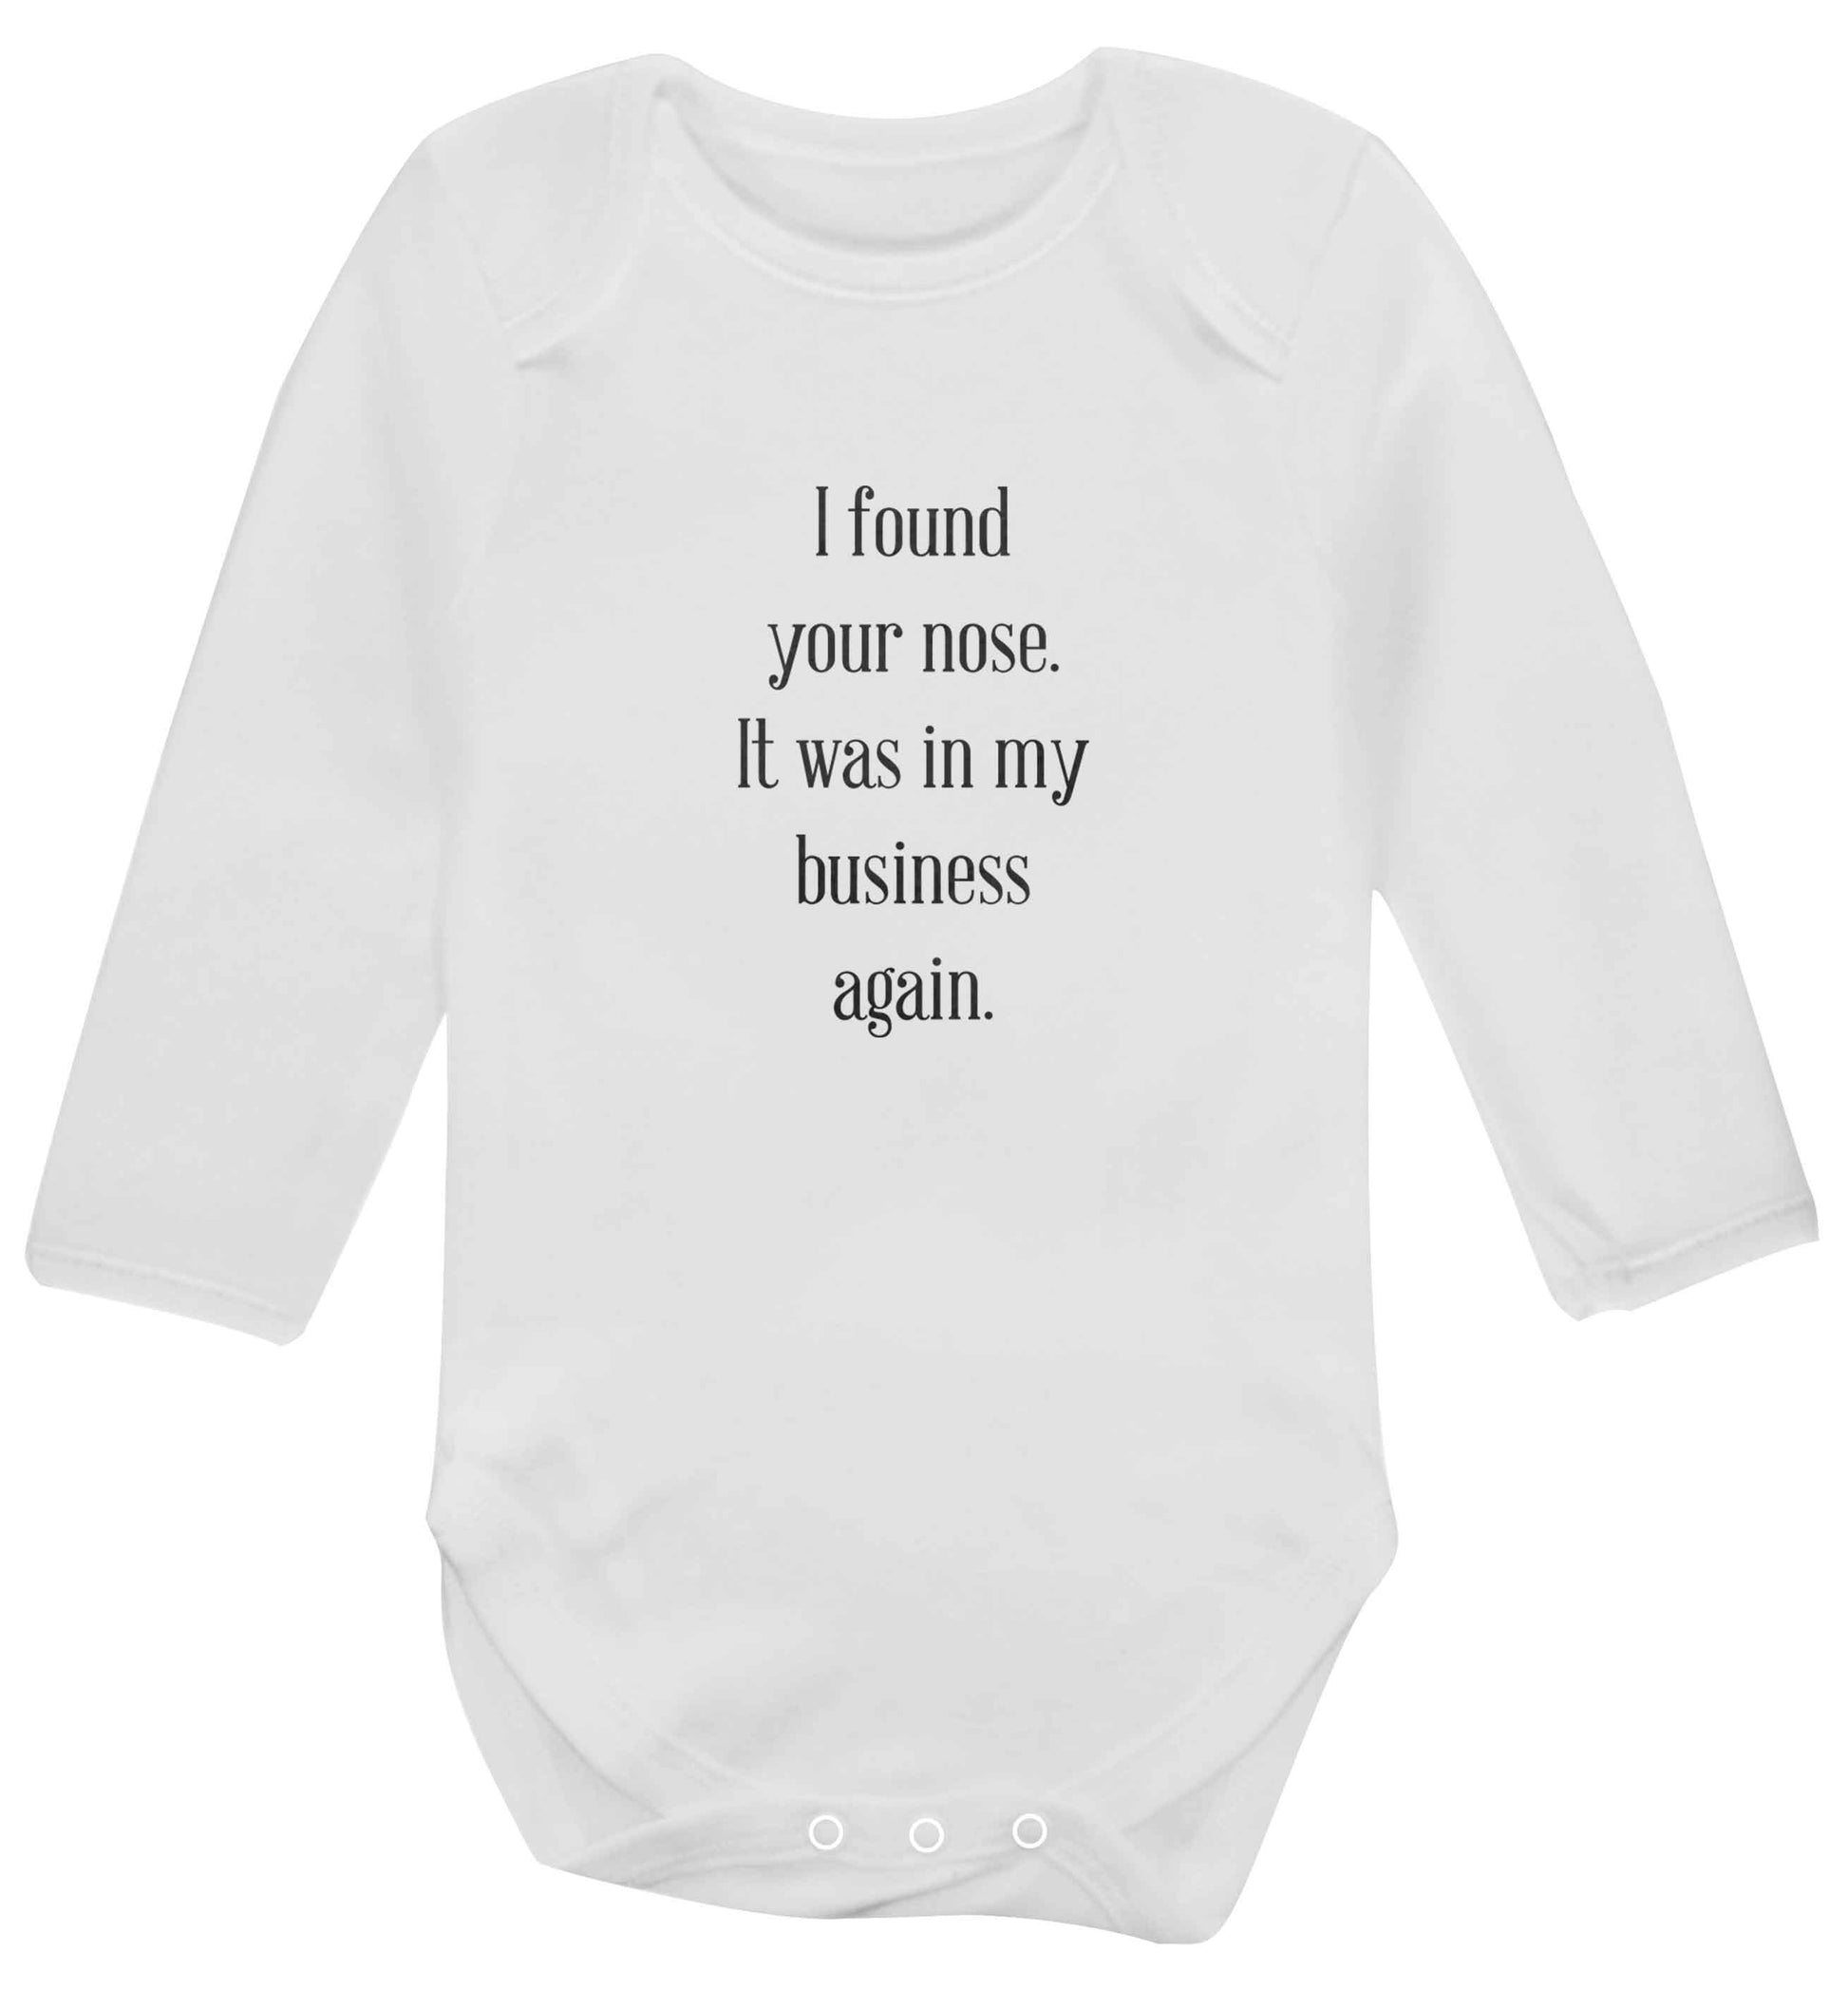 I found your nose it was in my business again baby vest long sleeved white 6-12 months